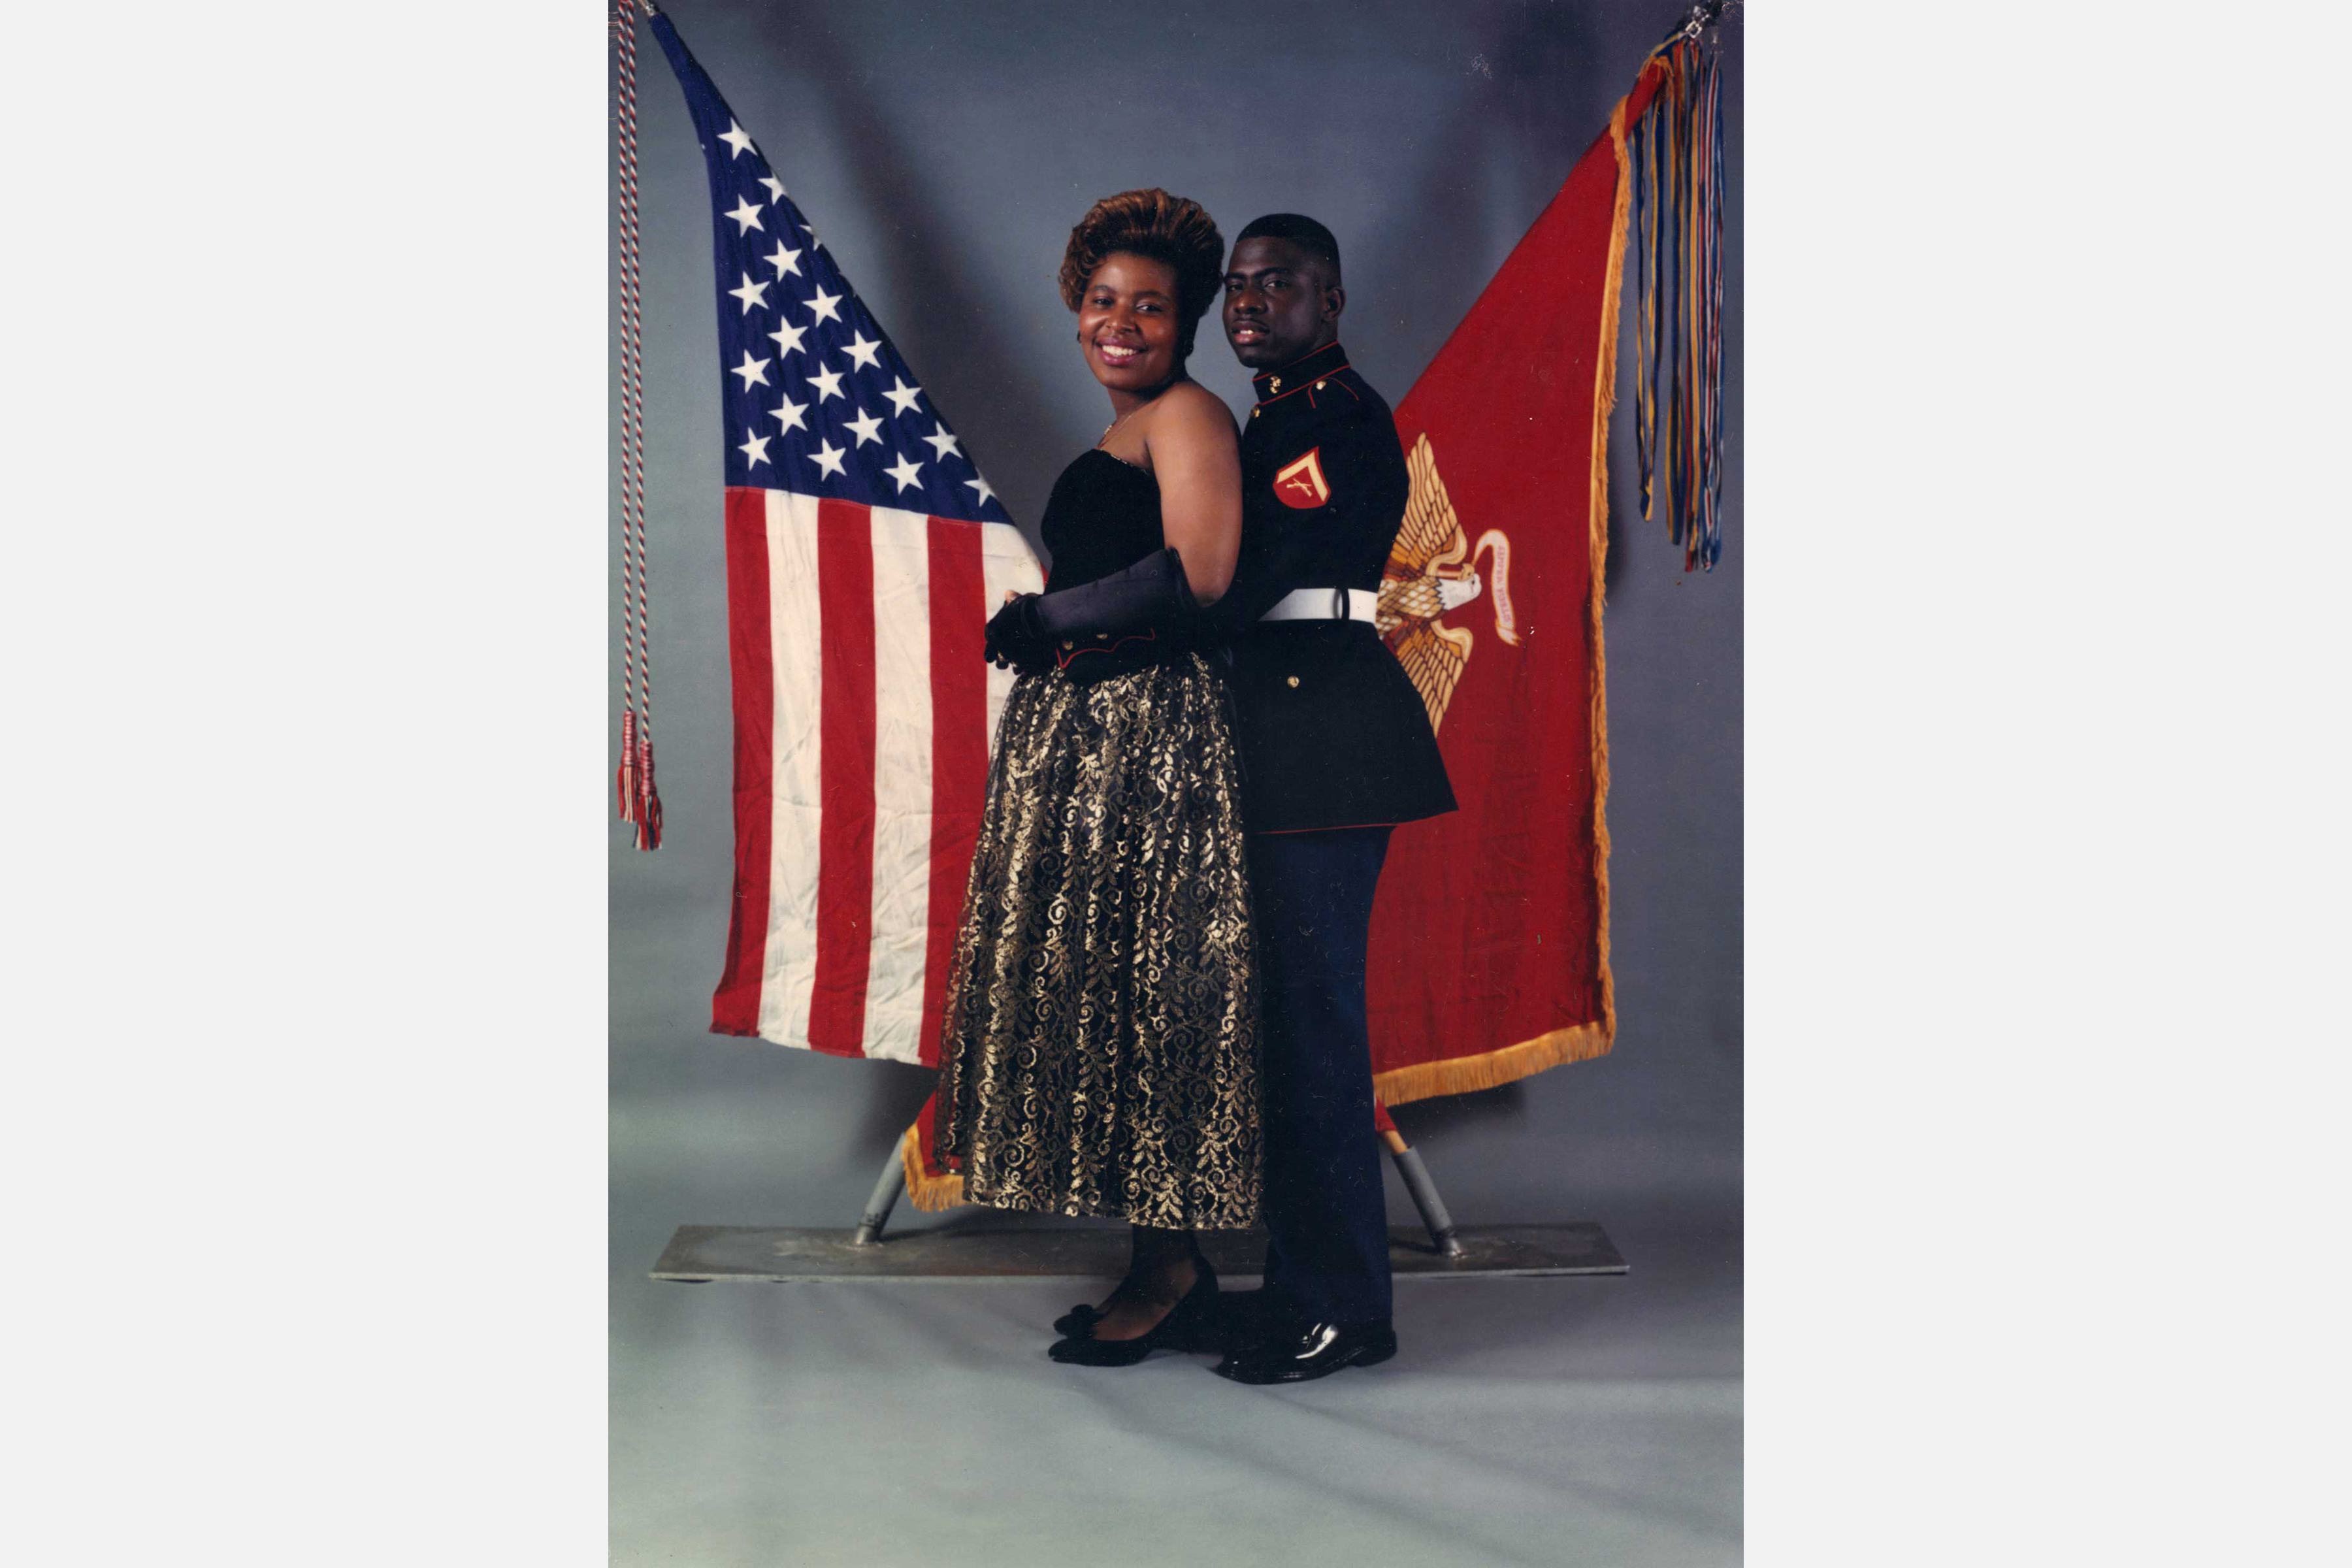 Ginger Miller and her husband at the Marine Corps Ball, 1989.